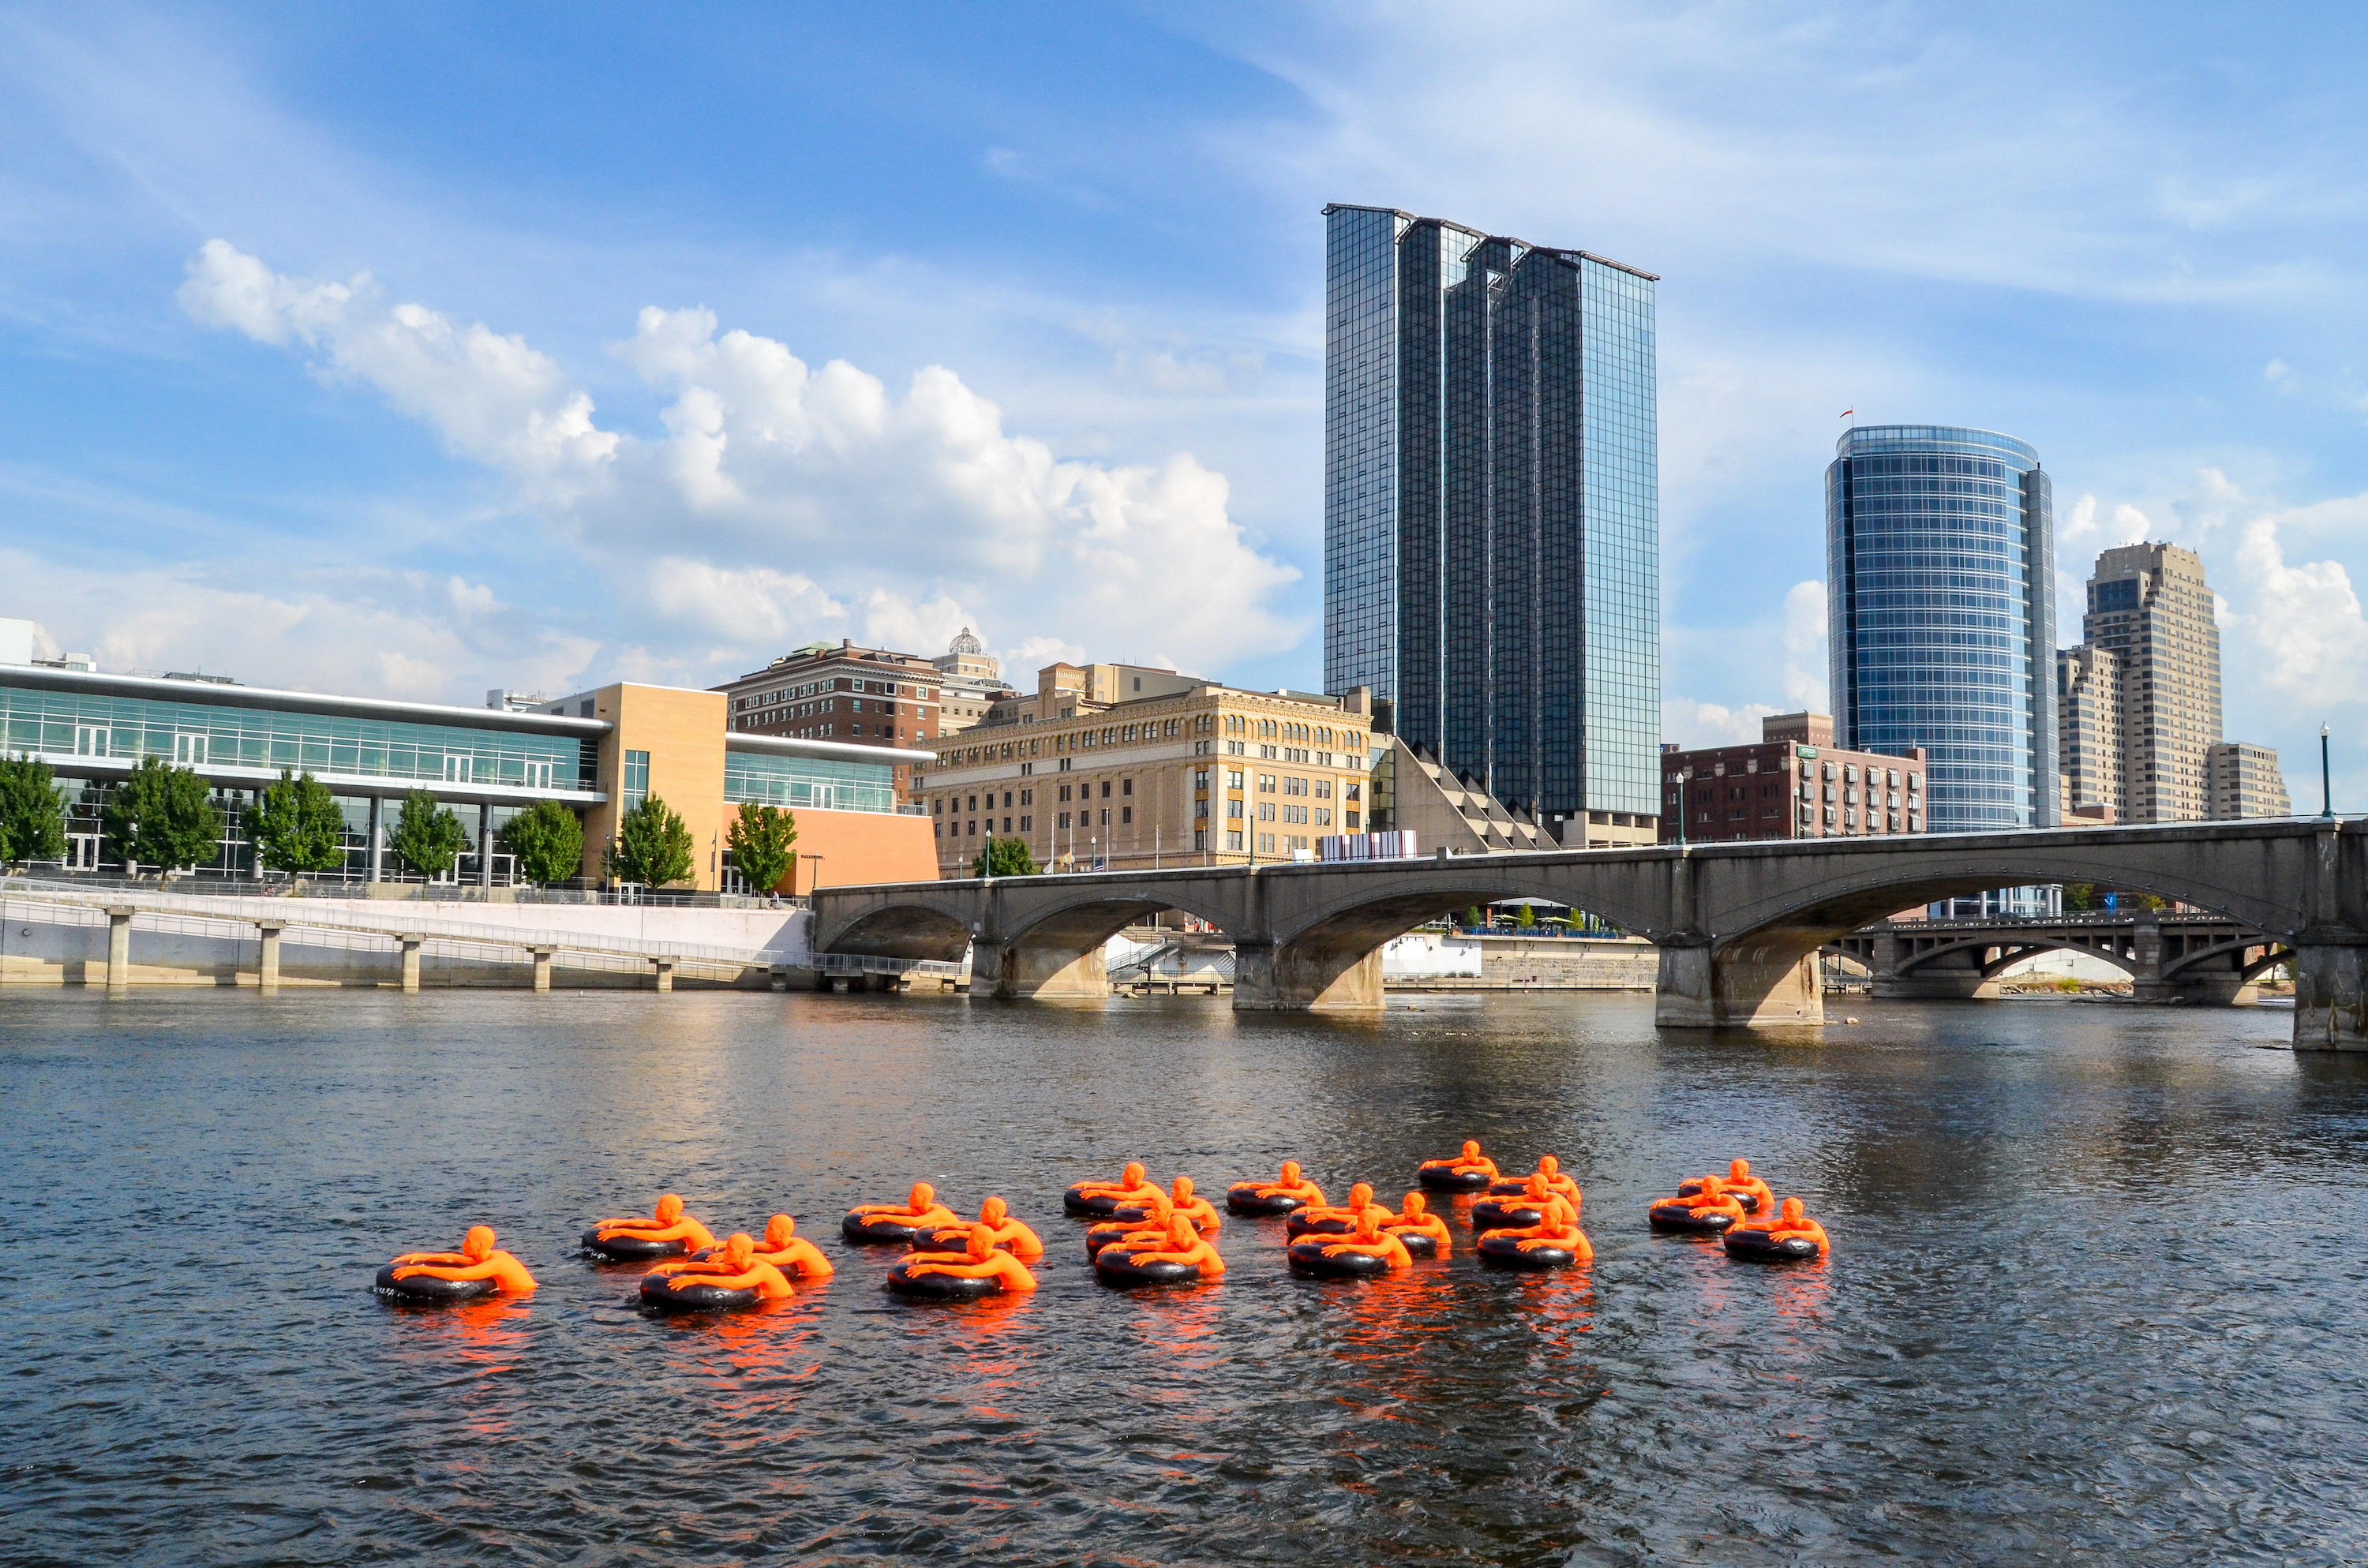 "SOS (Safety Orange Swimmers)" by A+J Art + Design, in the Grand River near Ah-Nab-Awen Park